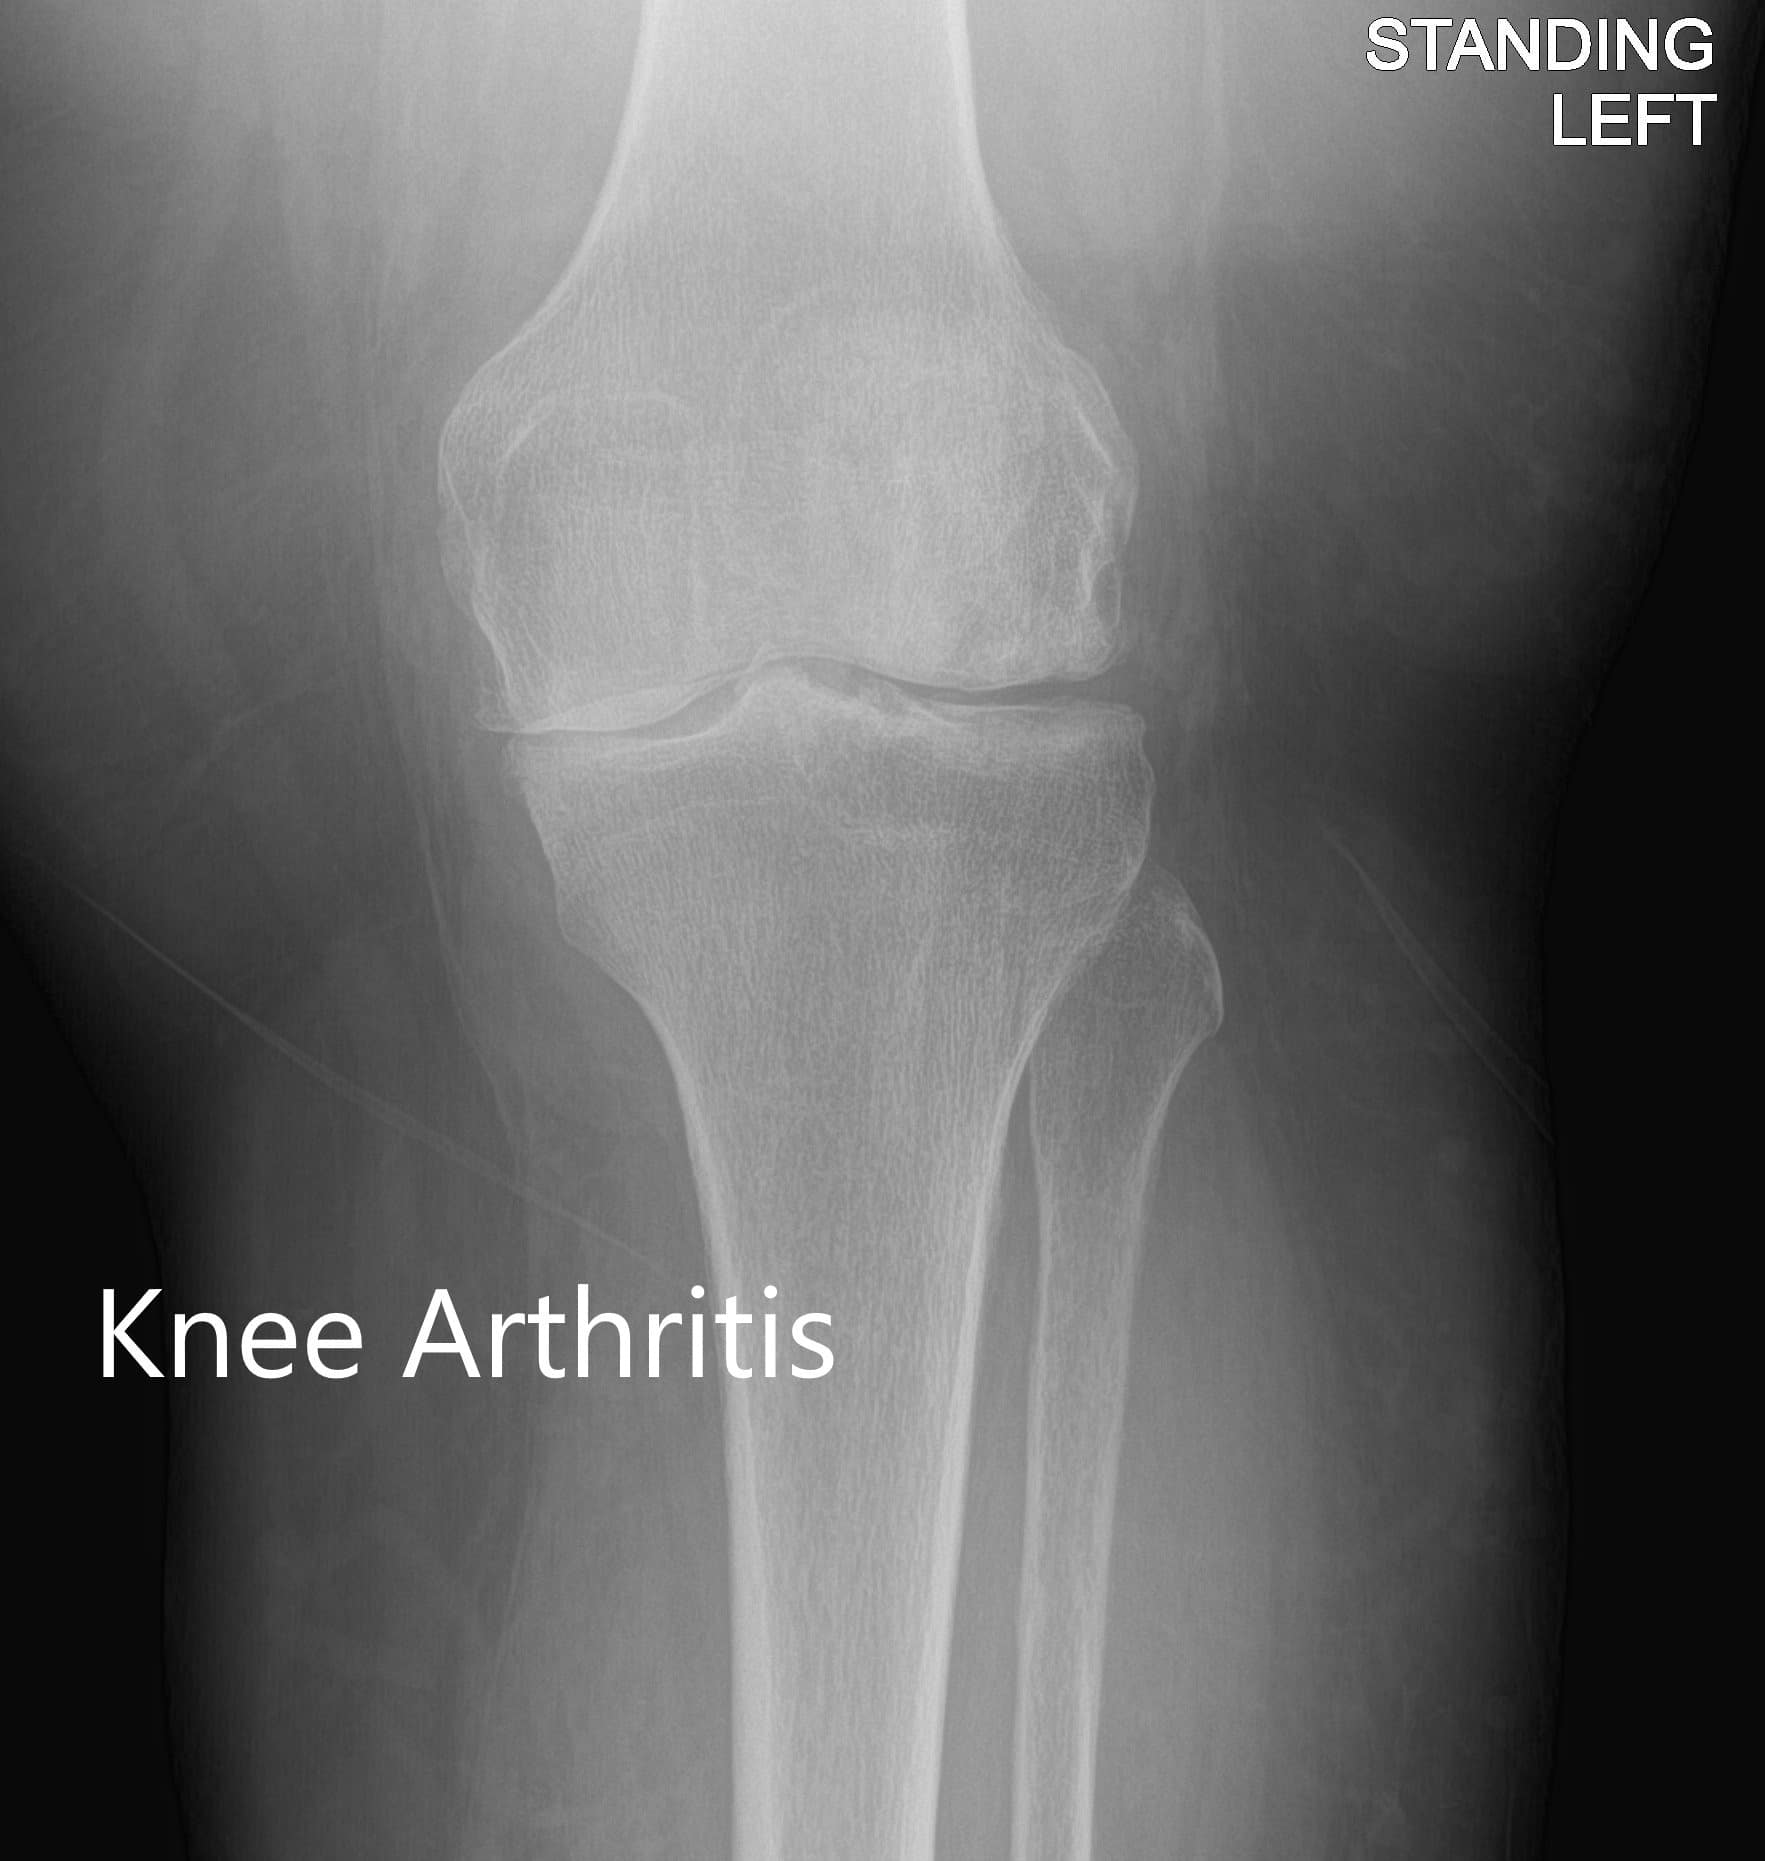 Case Study Osteoarthritis With A Total Knee